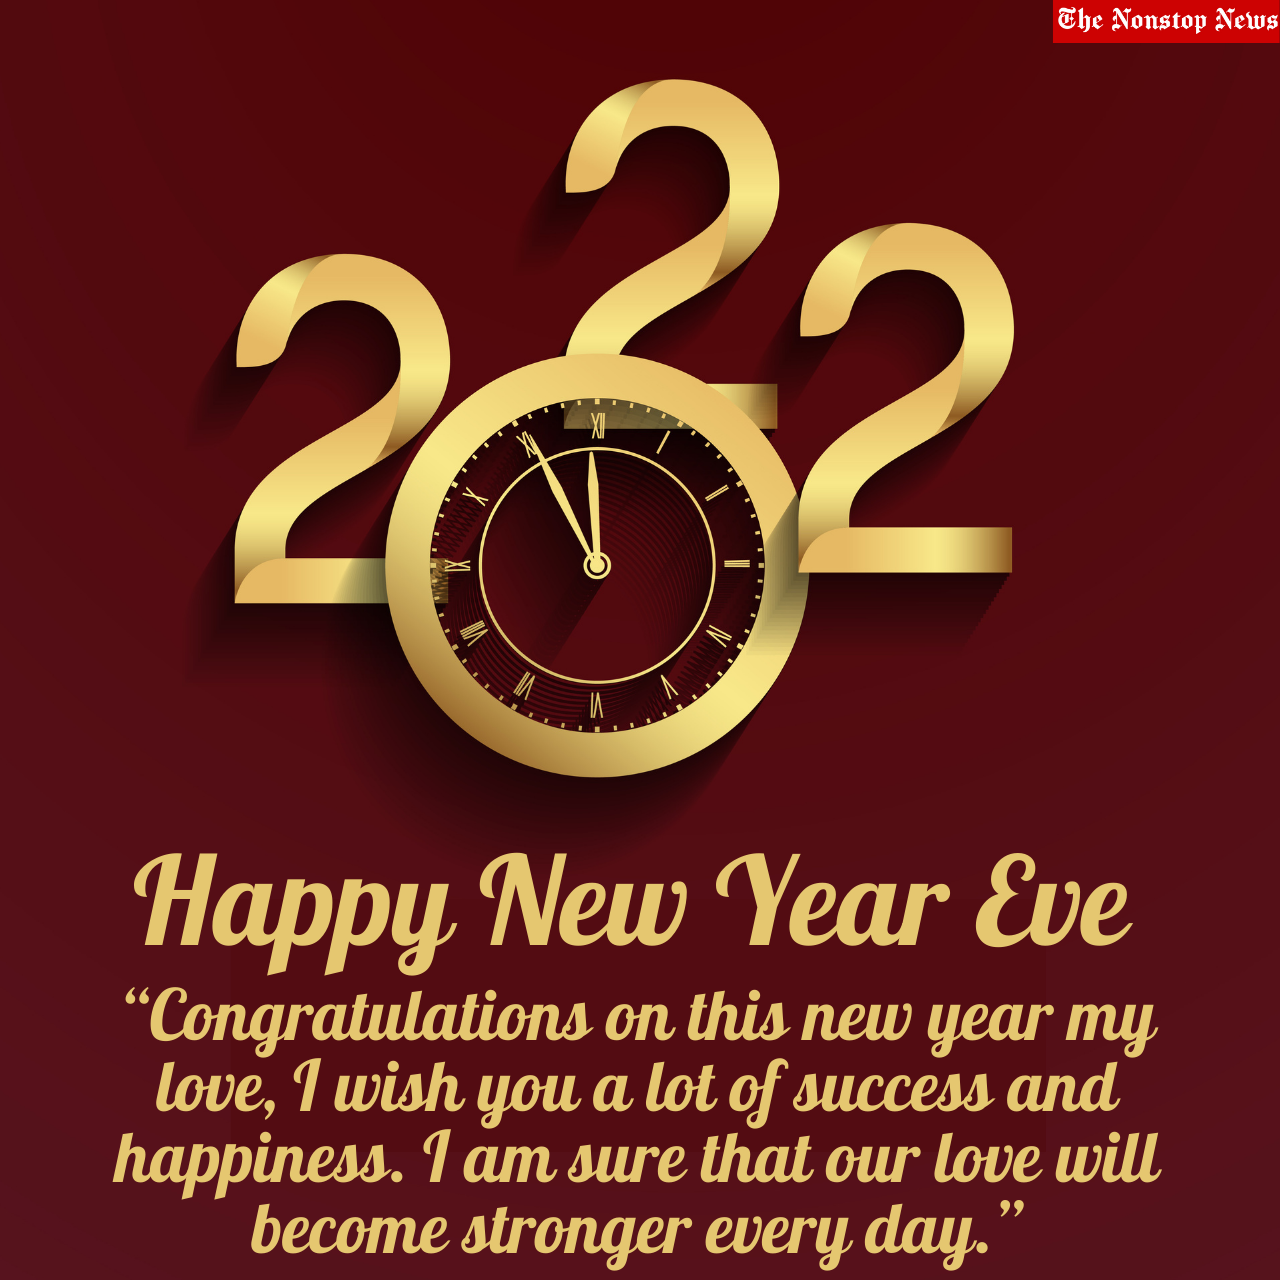 Happy New Year Eve 2022 Instagram Captions, Facebook Greetings, Twitter Images, WhatsApp Messages Pinterest Posters, Cliparts, Messages to Share